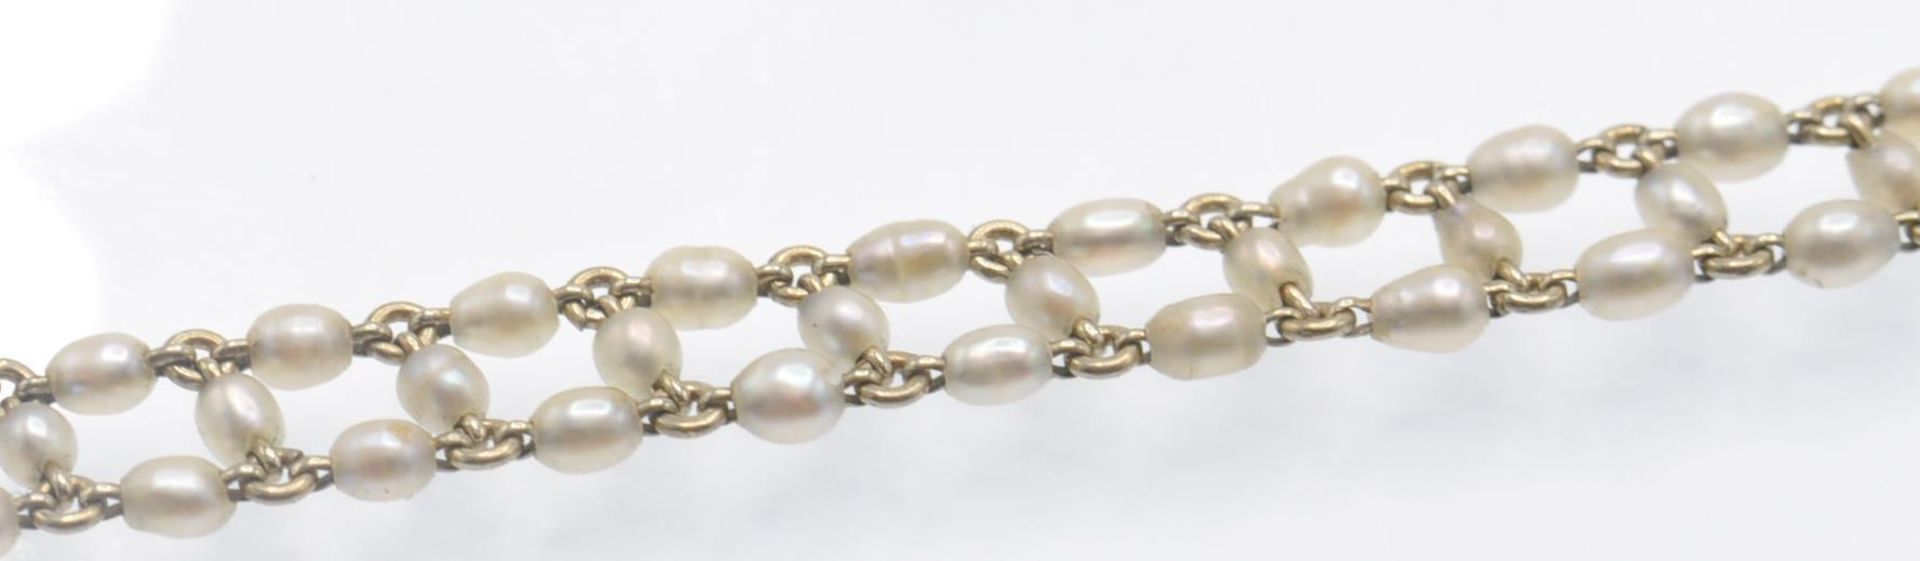 An 18ct Gold & Seed Pearl Choker Necklace - Image 5 of 6